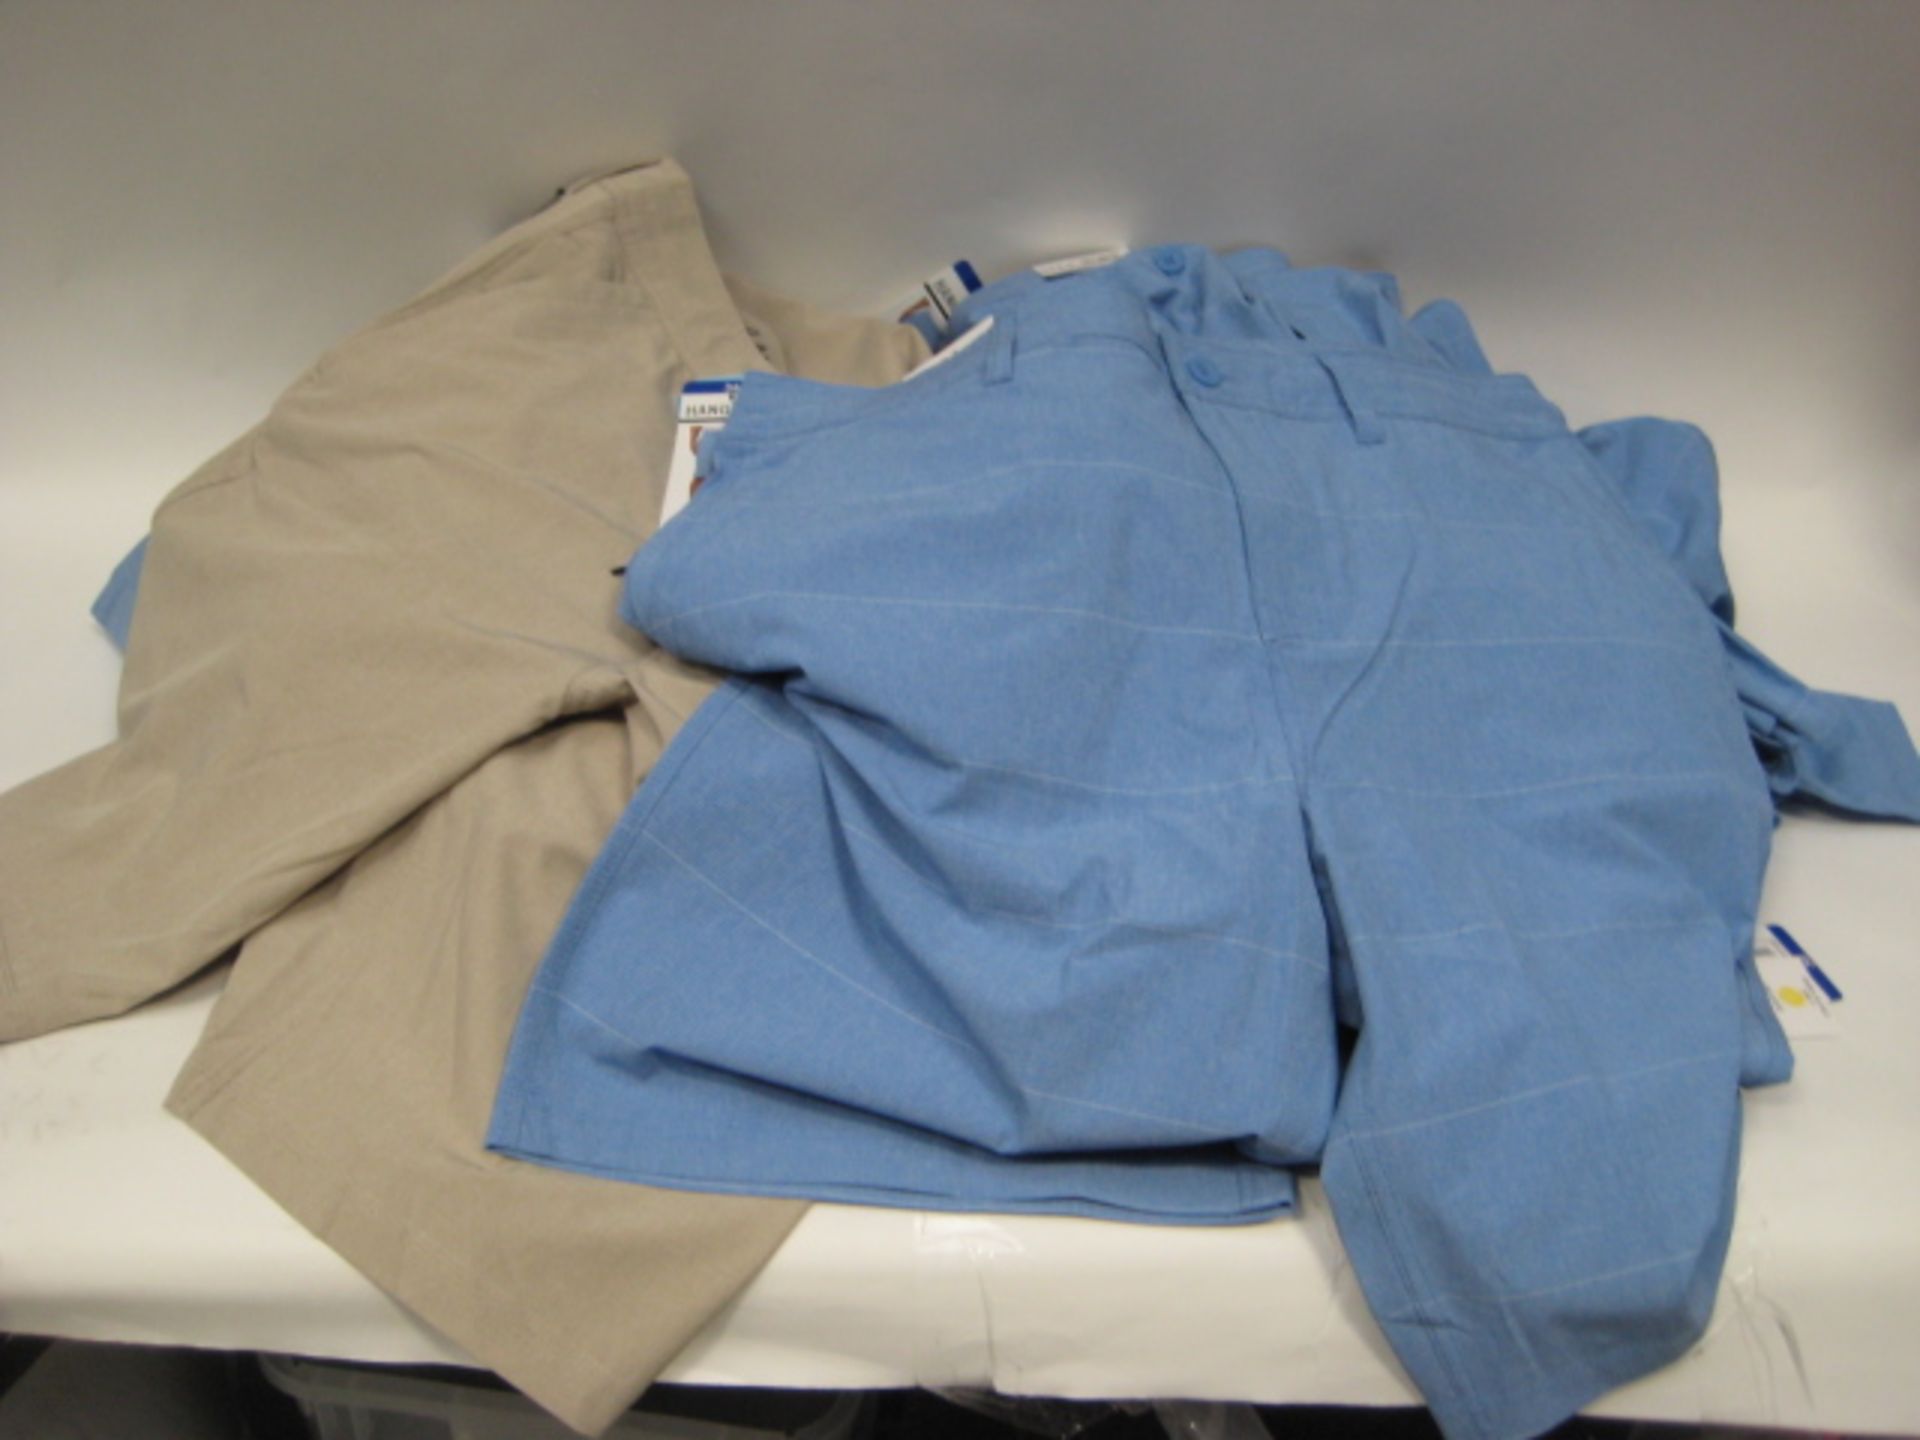 Bag containing 24 gents shorts by Pantene sizes 36'' - 38'' in blue and some beige